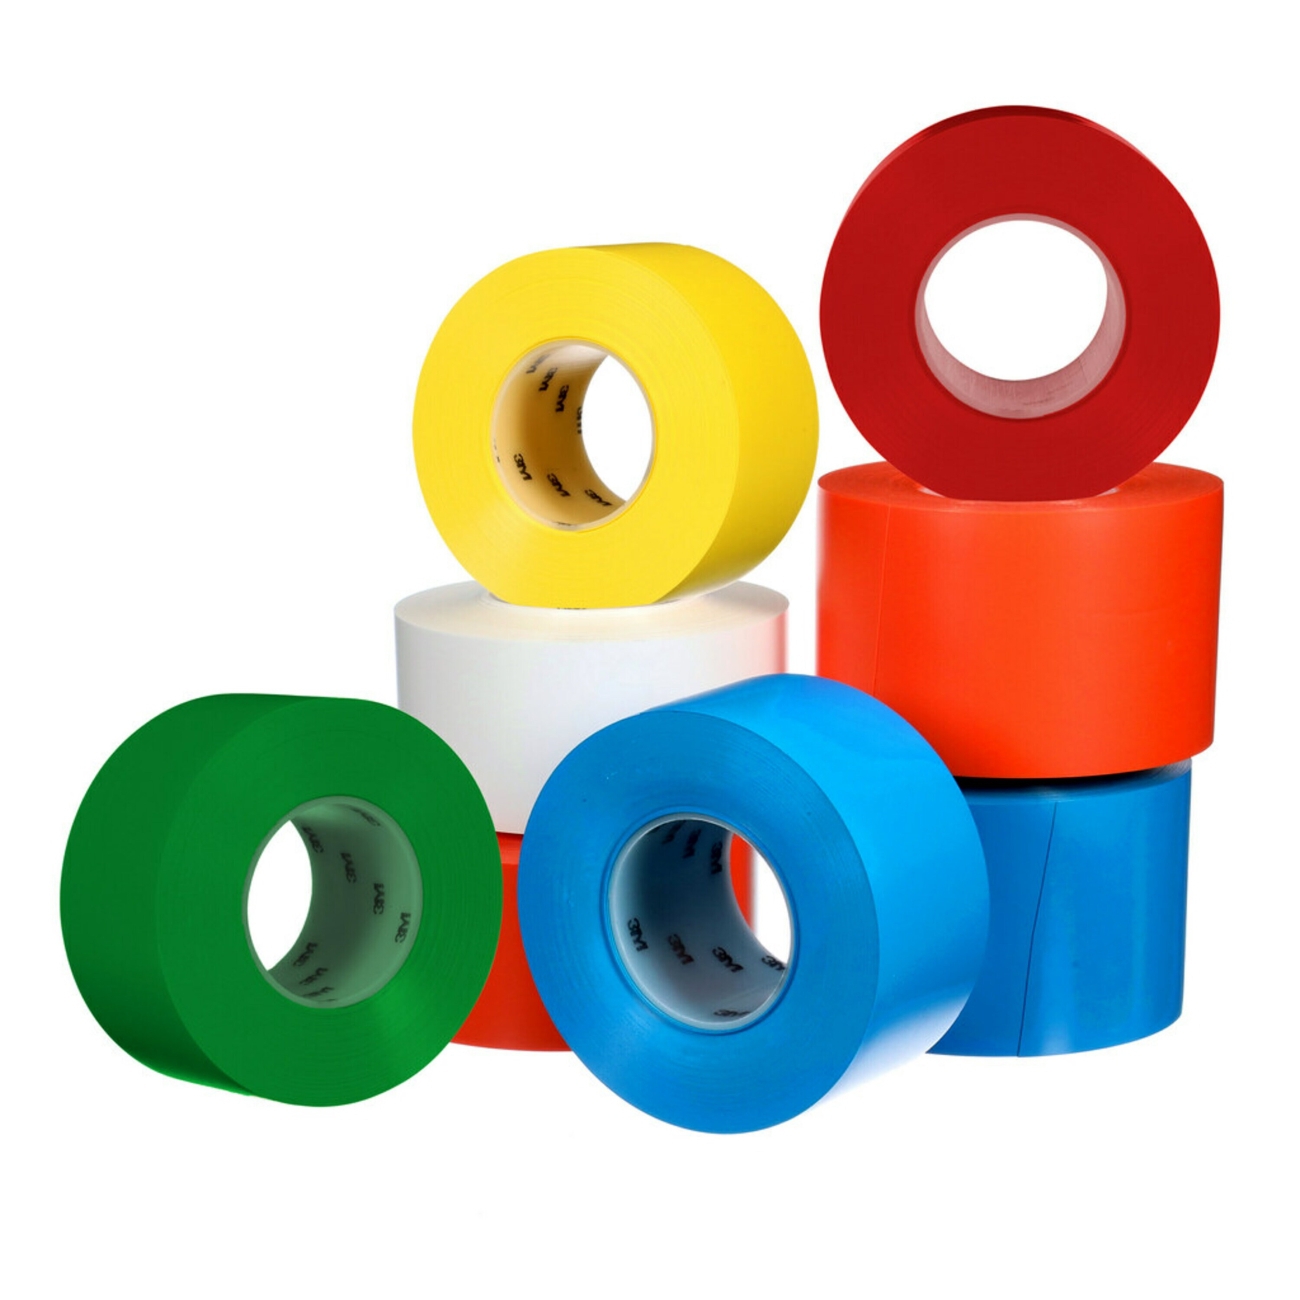 3M extra strong floor marking tape 971, red, 76.2mm x 32.9m, 0.43mm